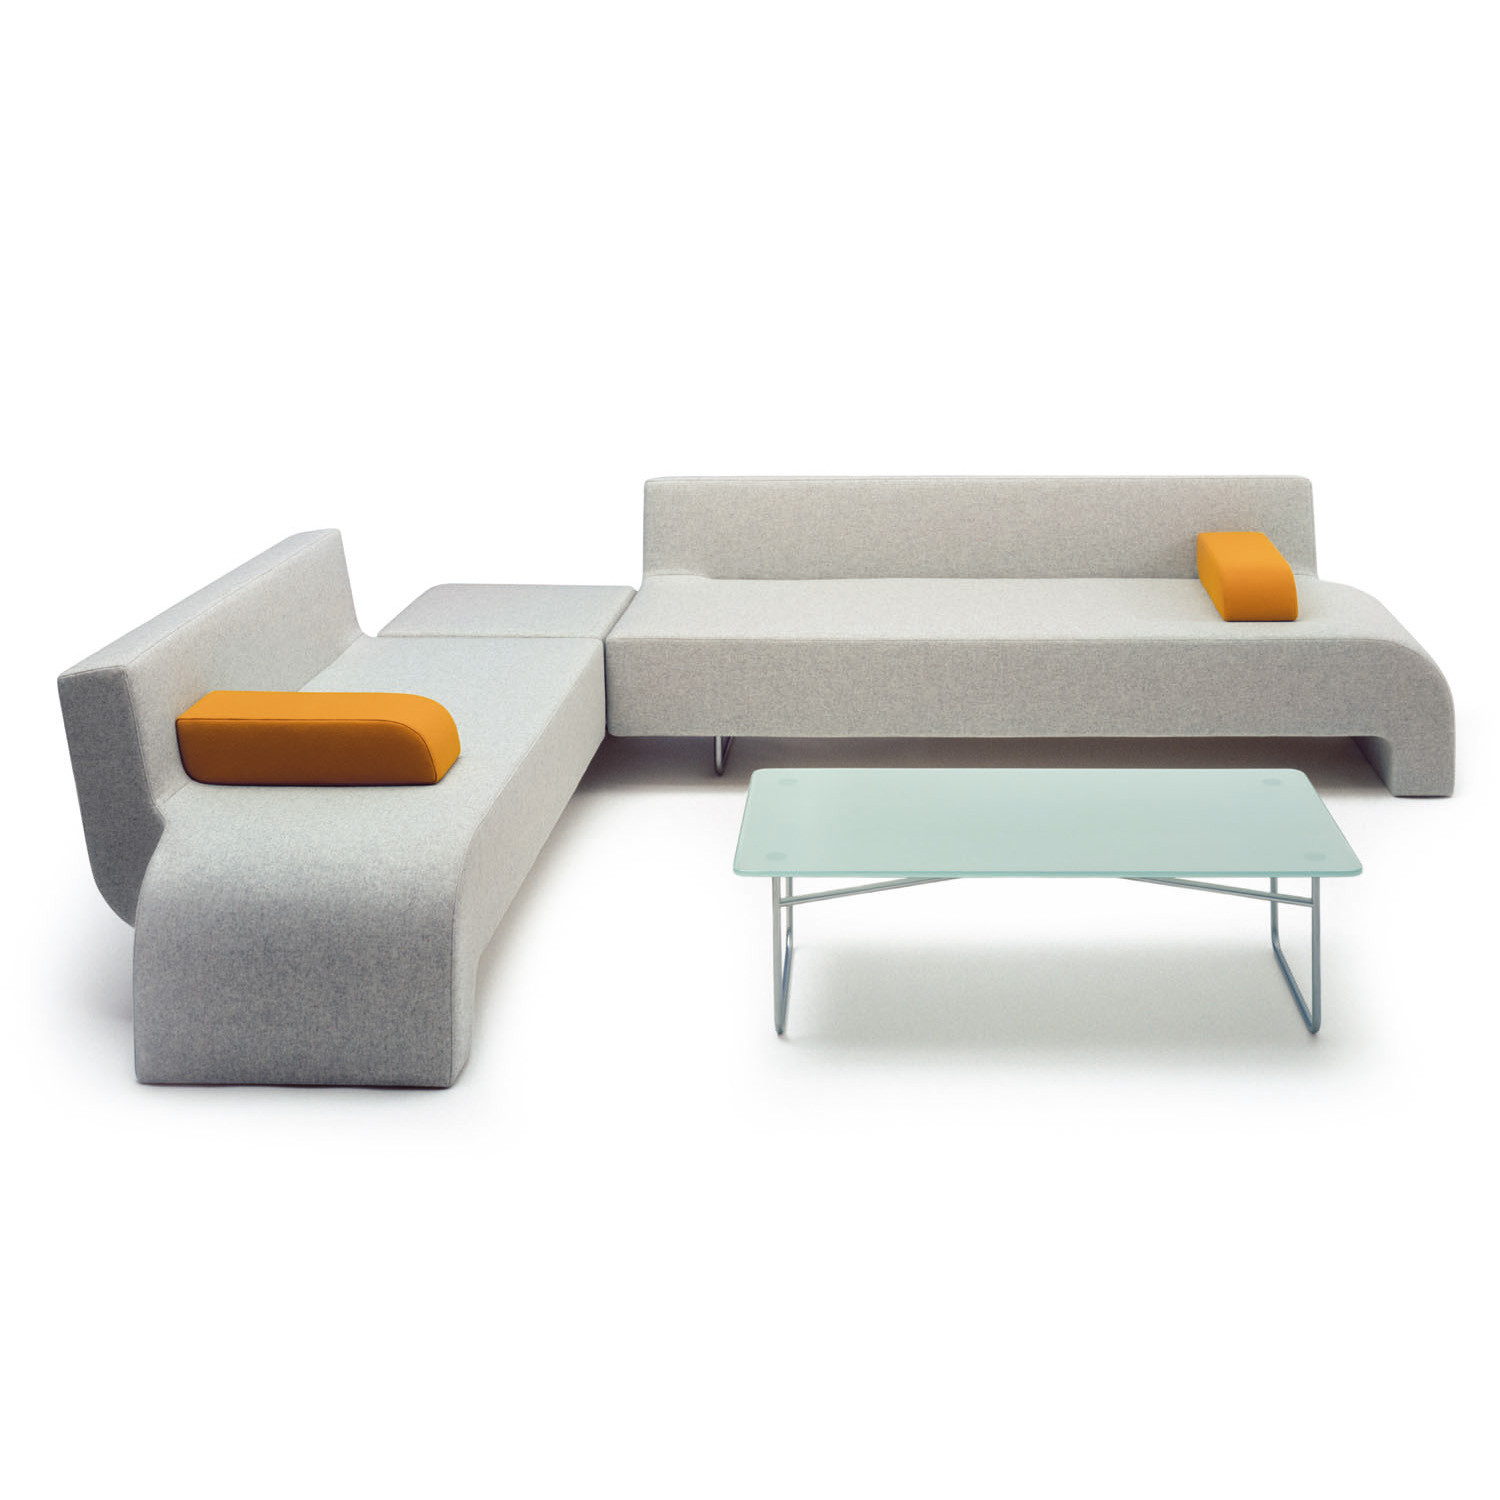 Hm30 Sofas combined with Corner Ottoman